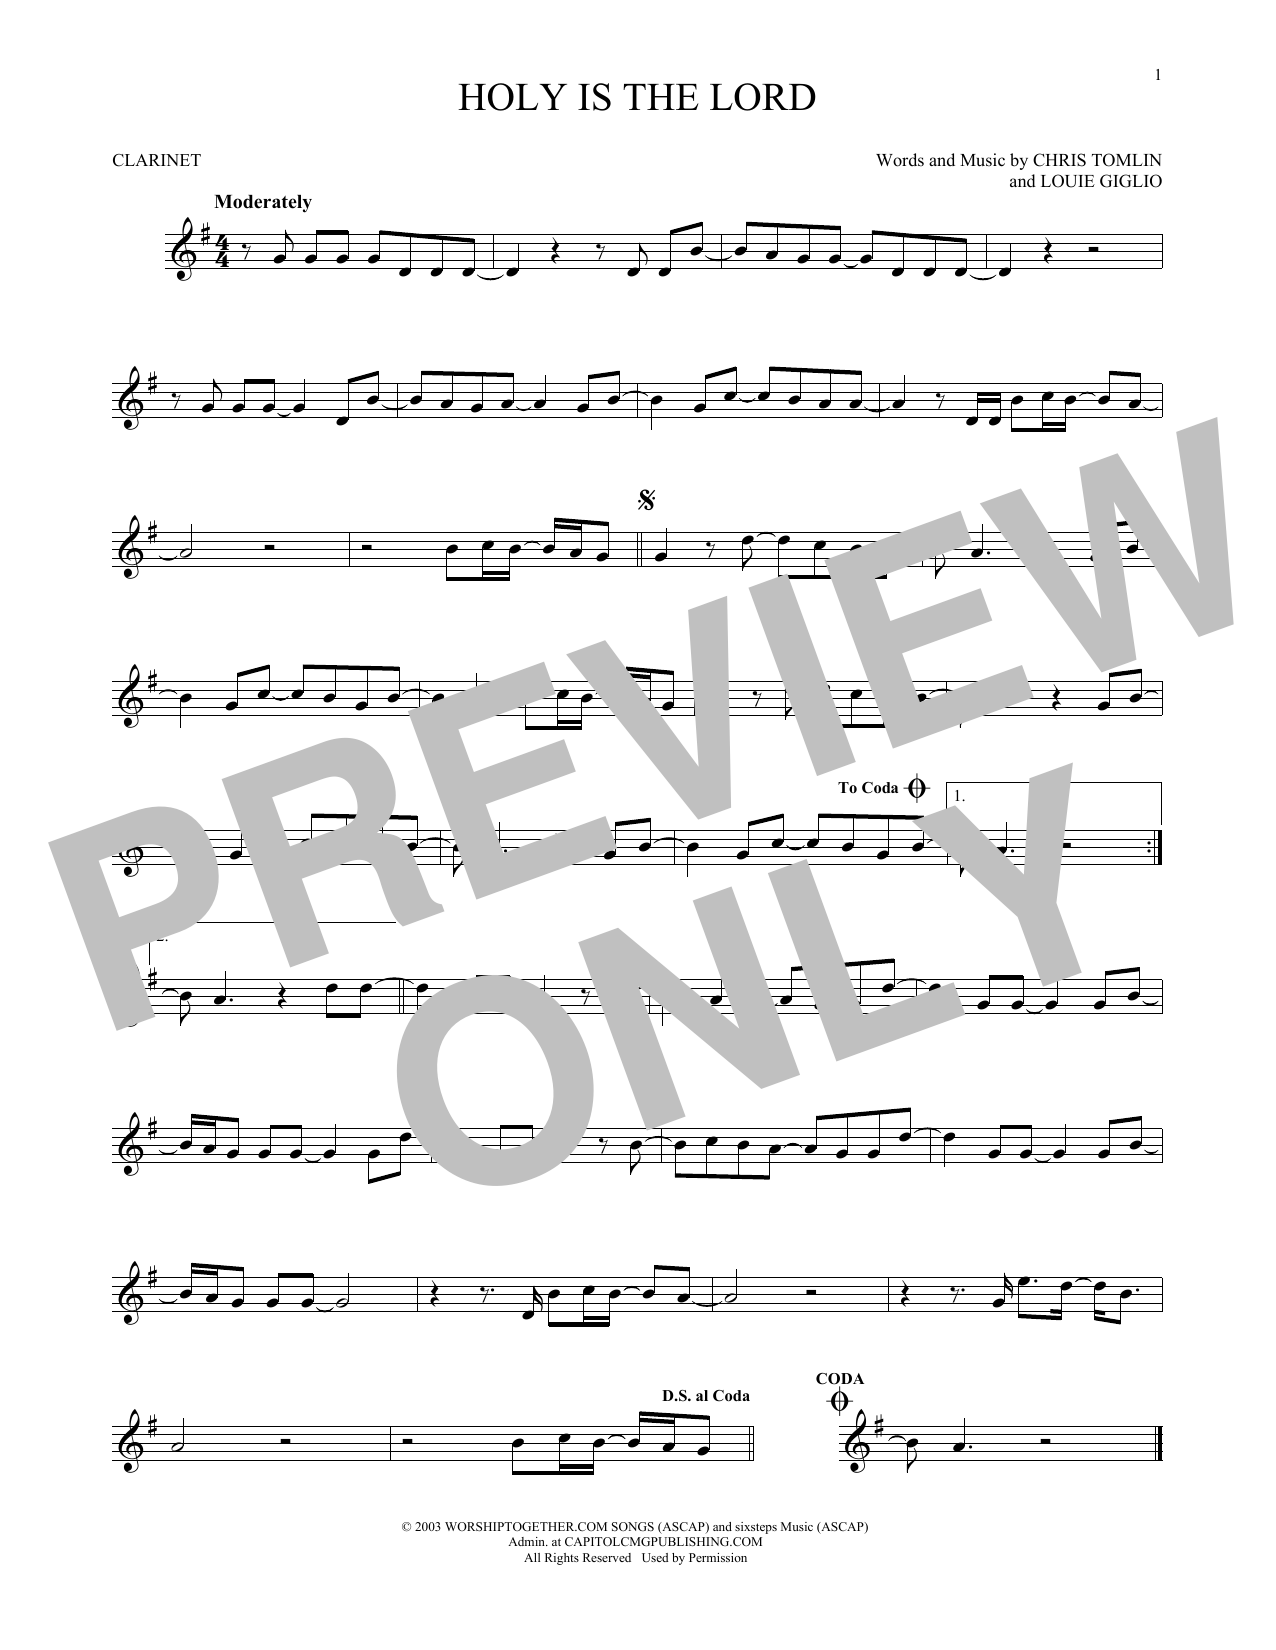 Chris Tomlin Holy Is The Lord sheet music notes printable PDF score